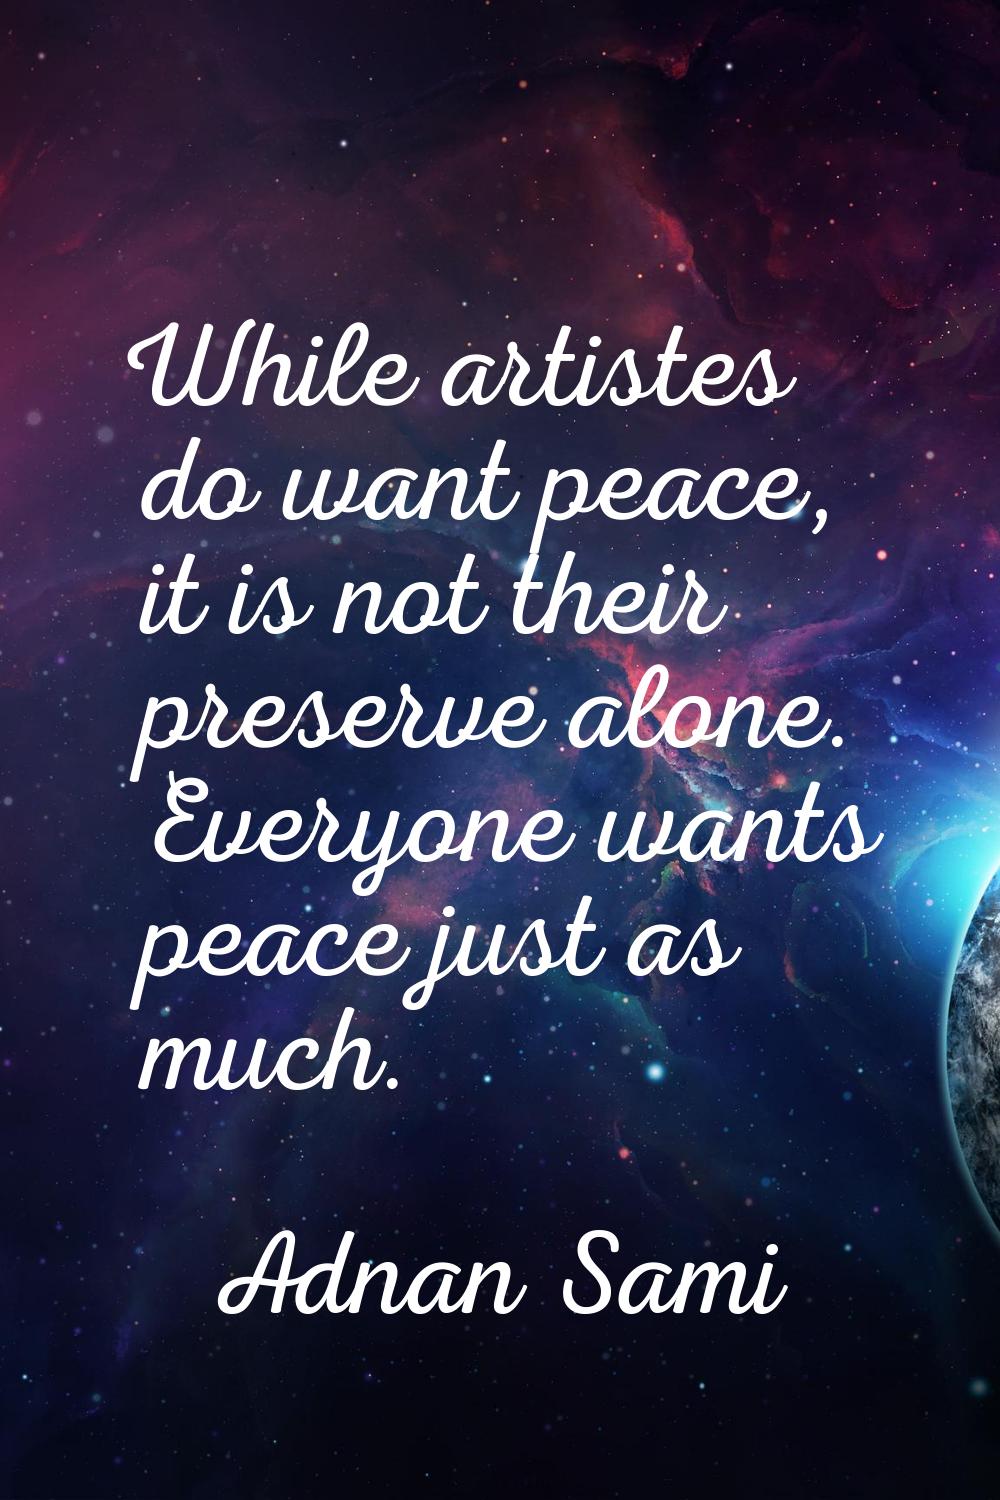 While artistes do want peace, it is not their preserve alone. Everyone wants peace just as much.